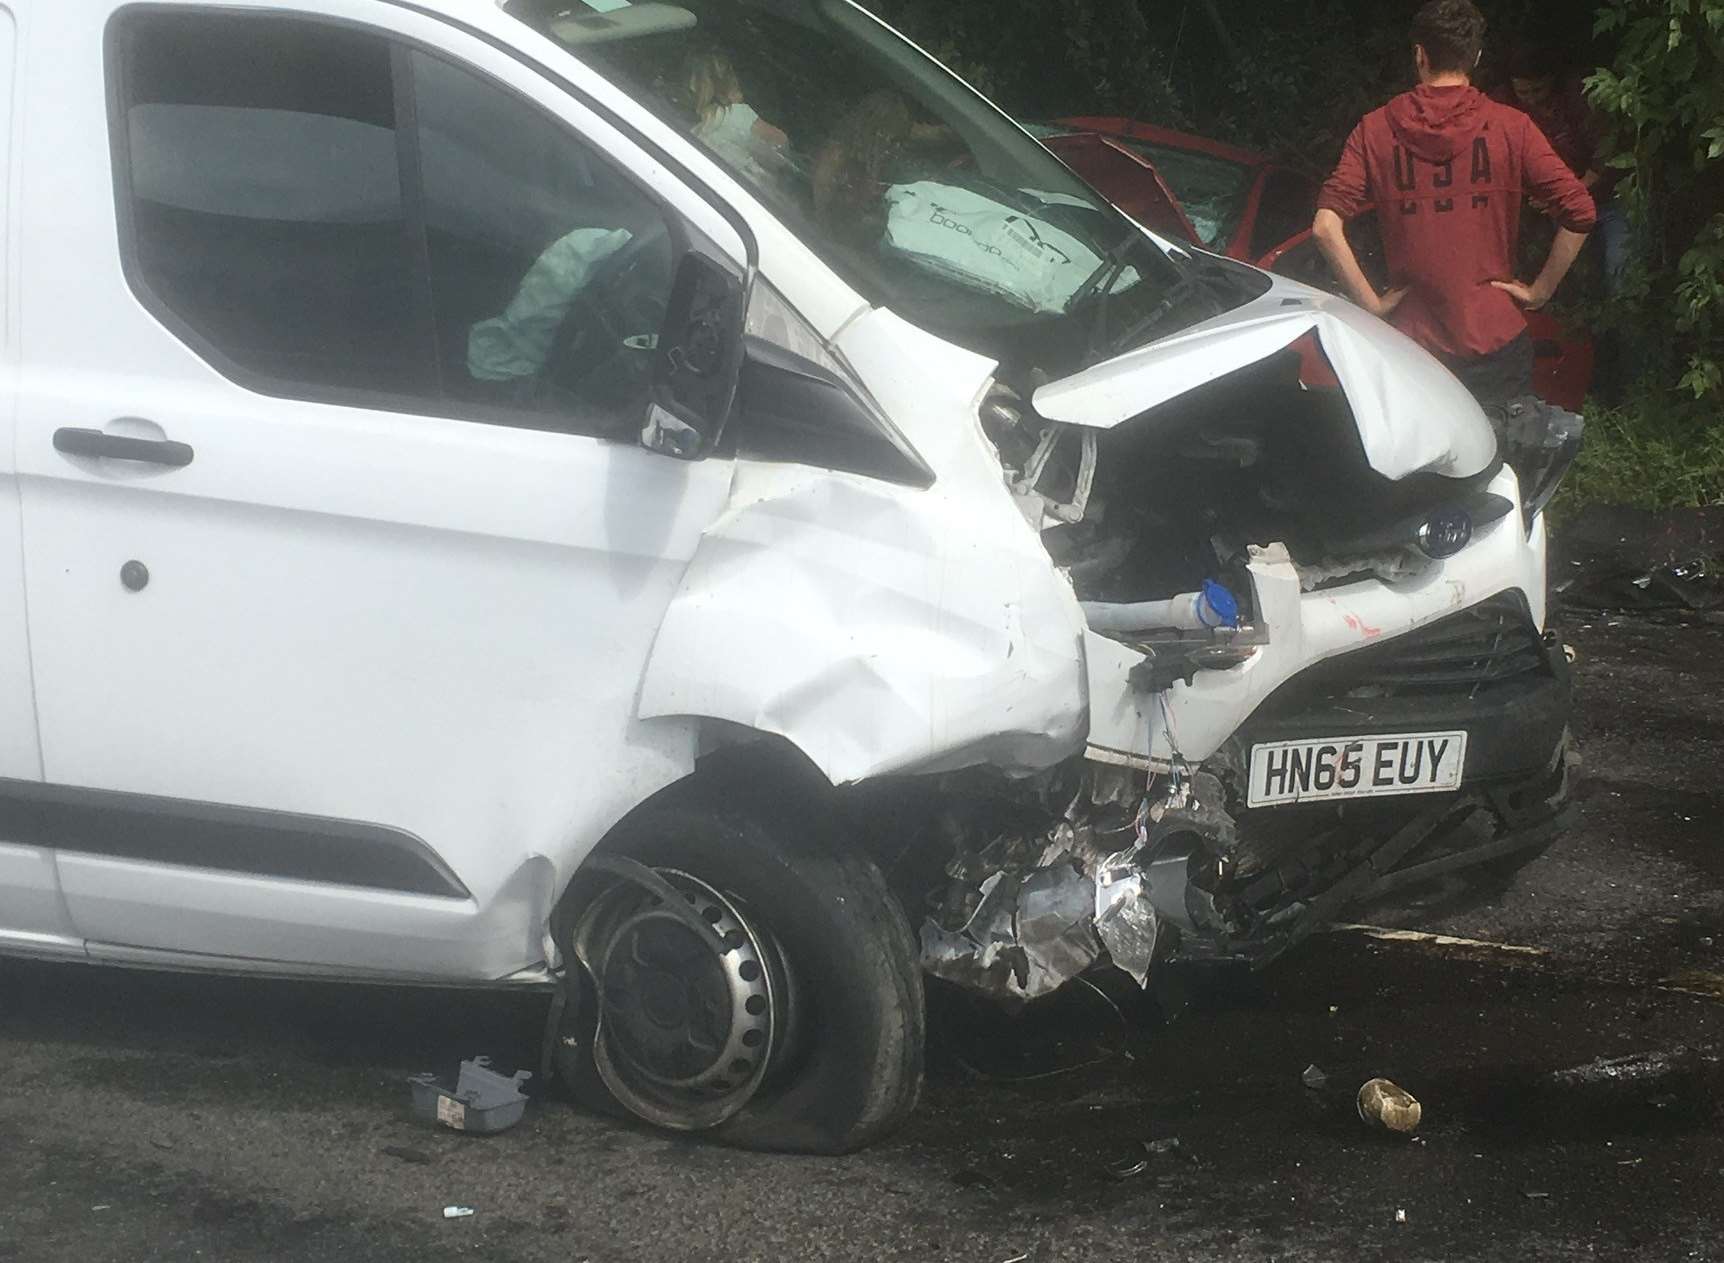 The van involved in the fatal crash